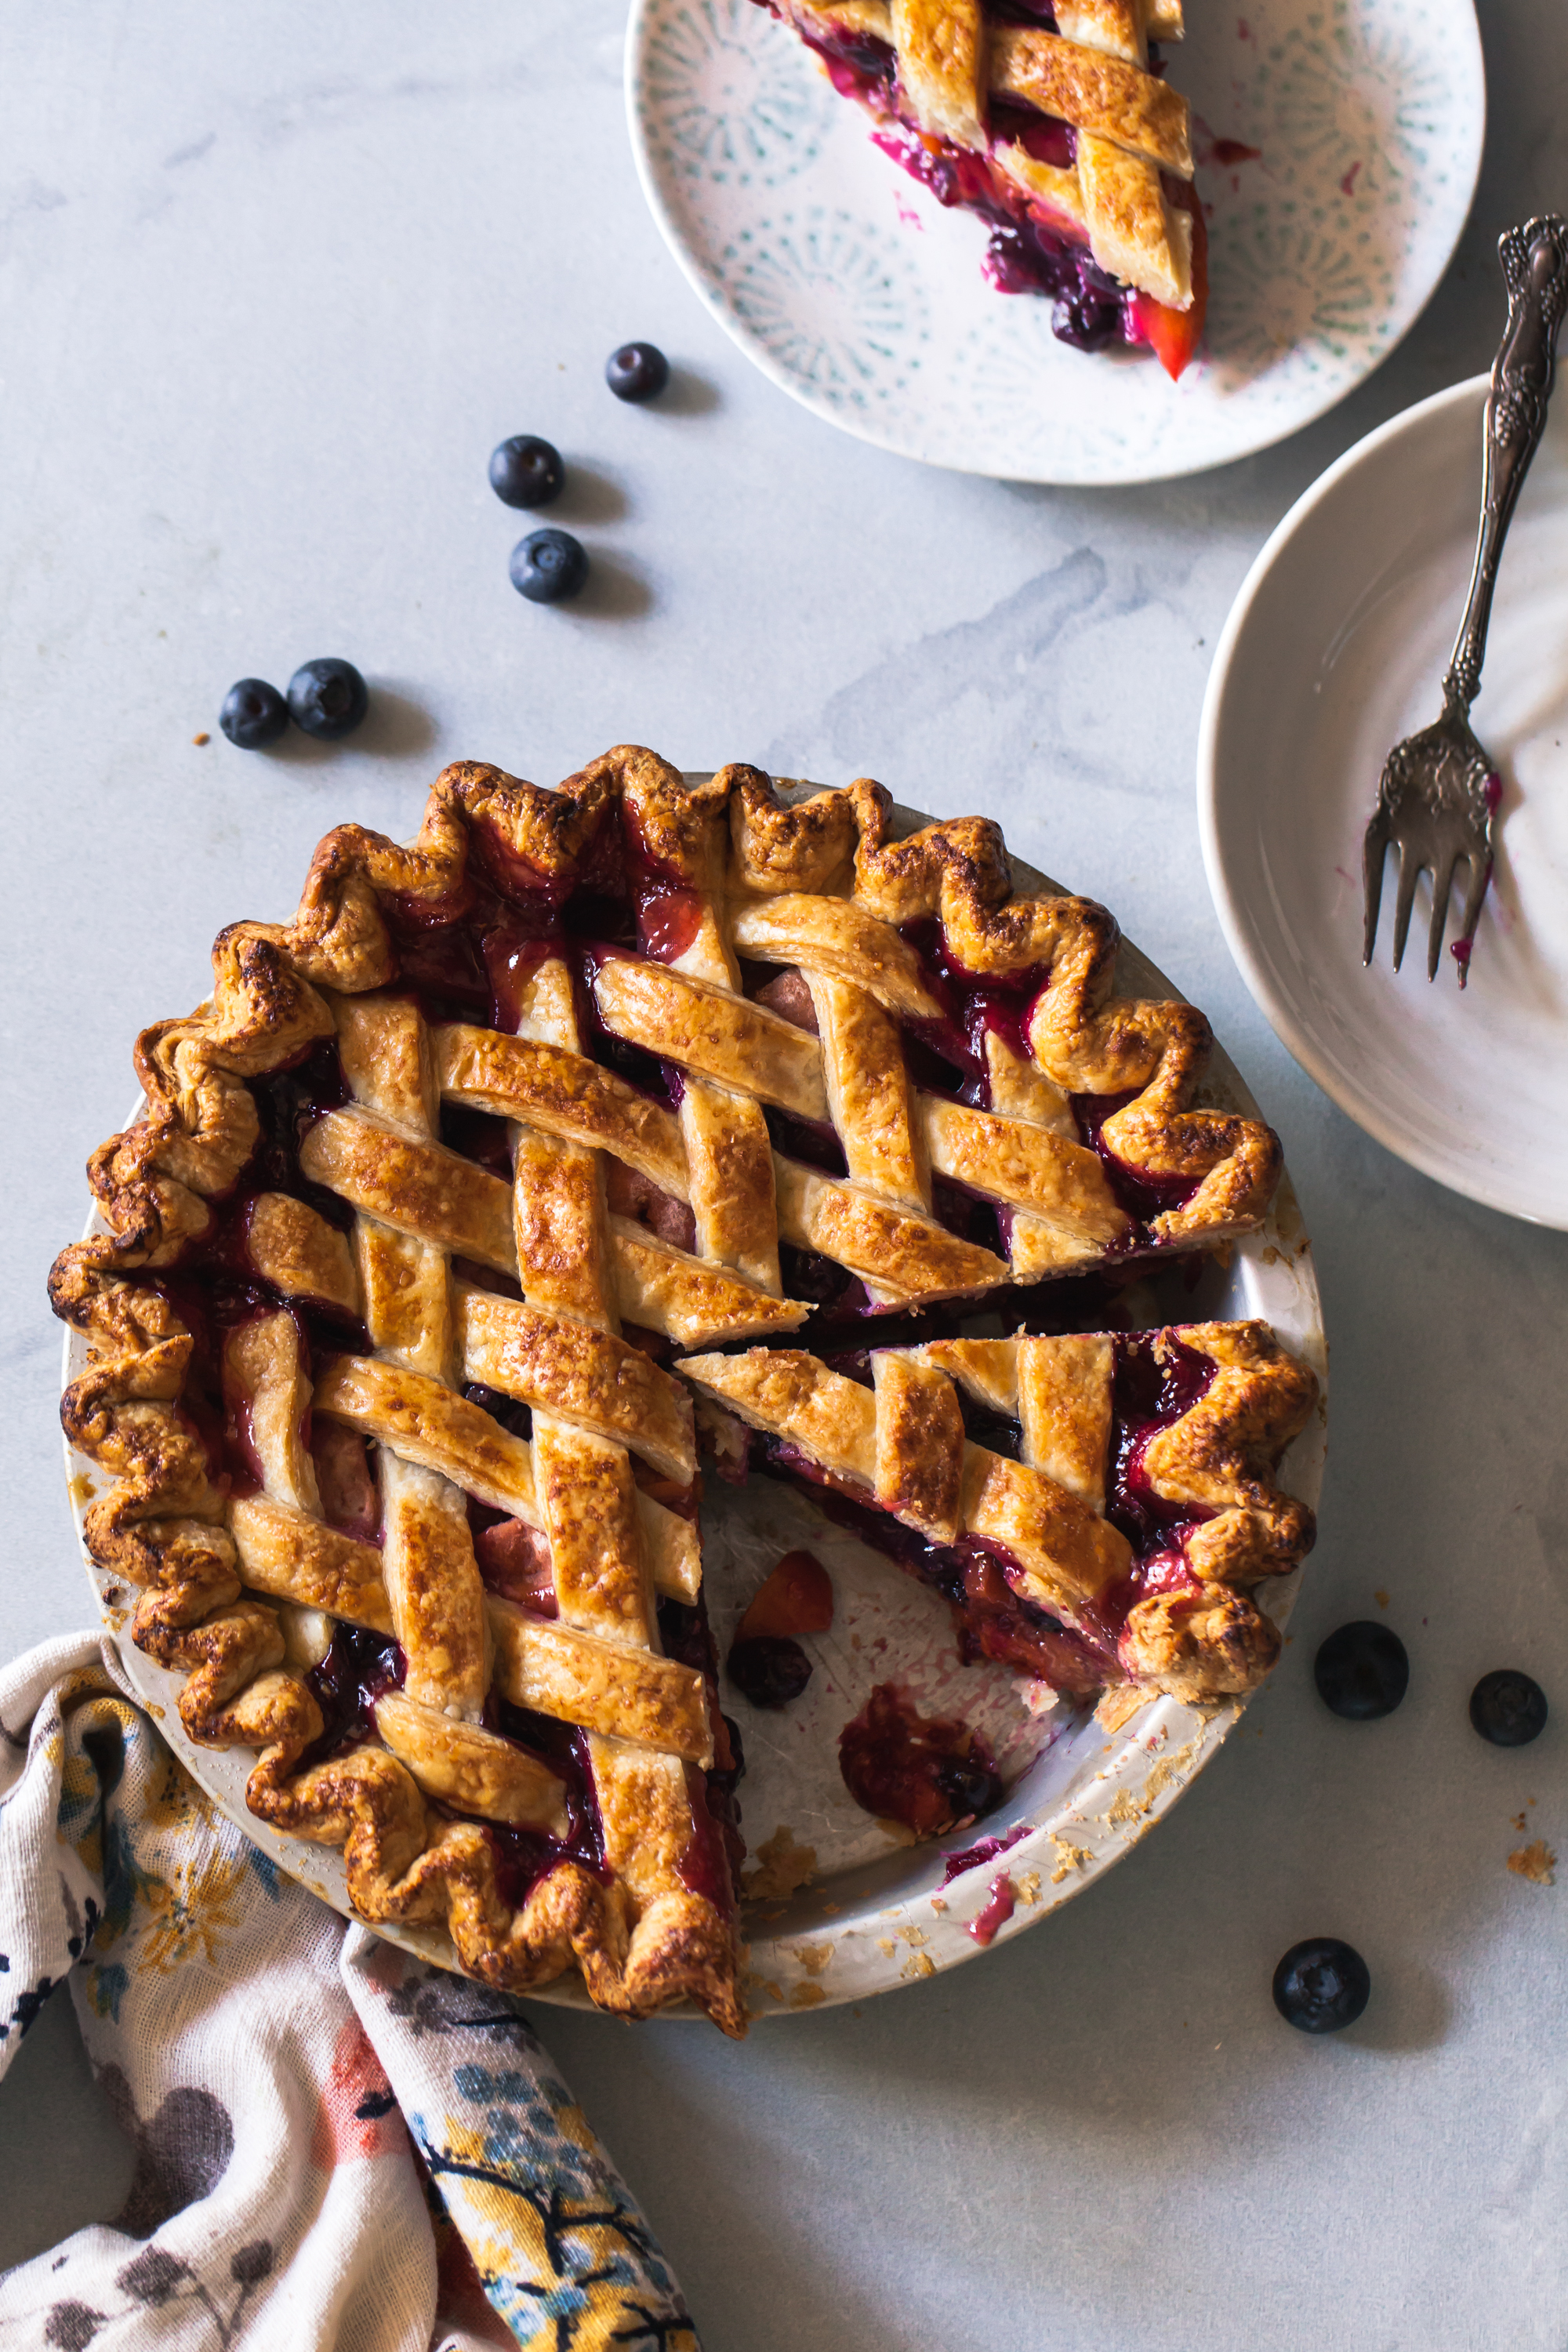 Blueberry Peach Pie Recipe with apricots and lattice crust.